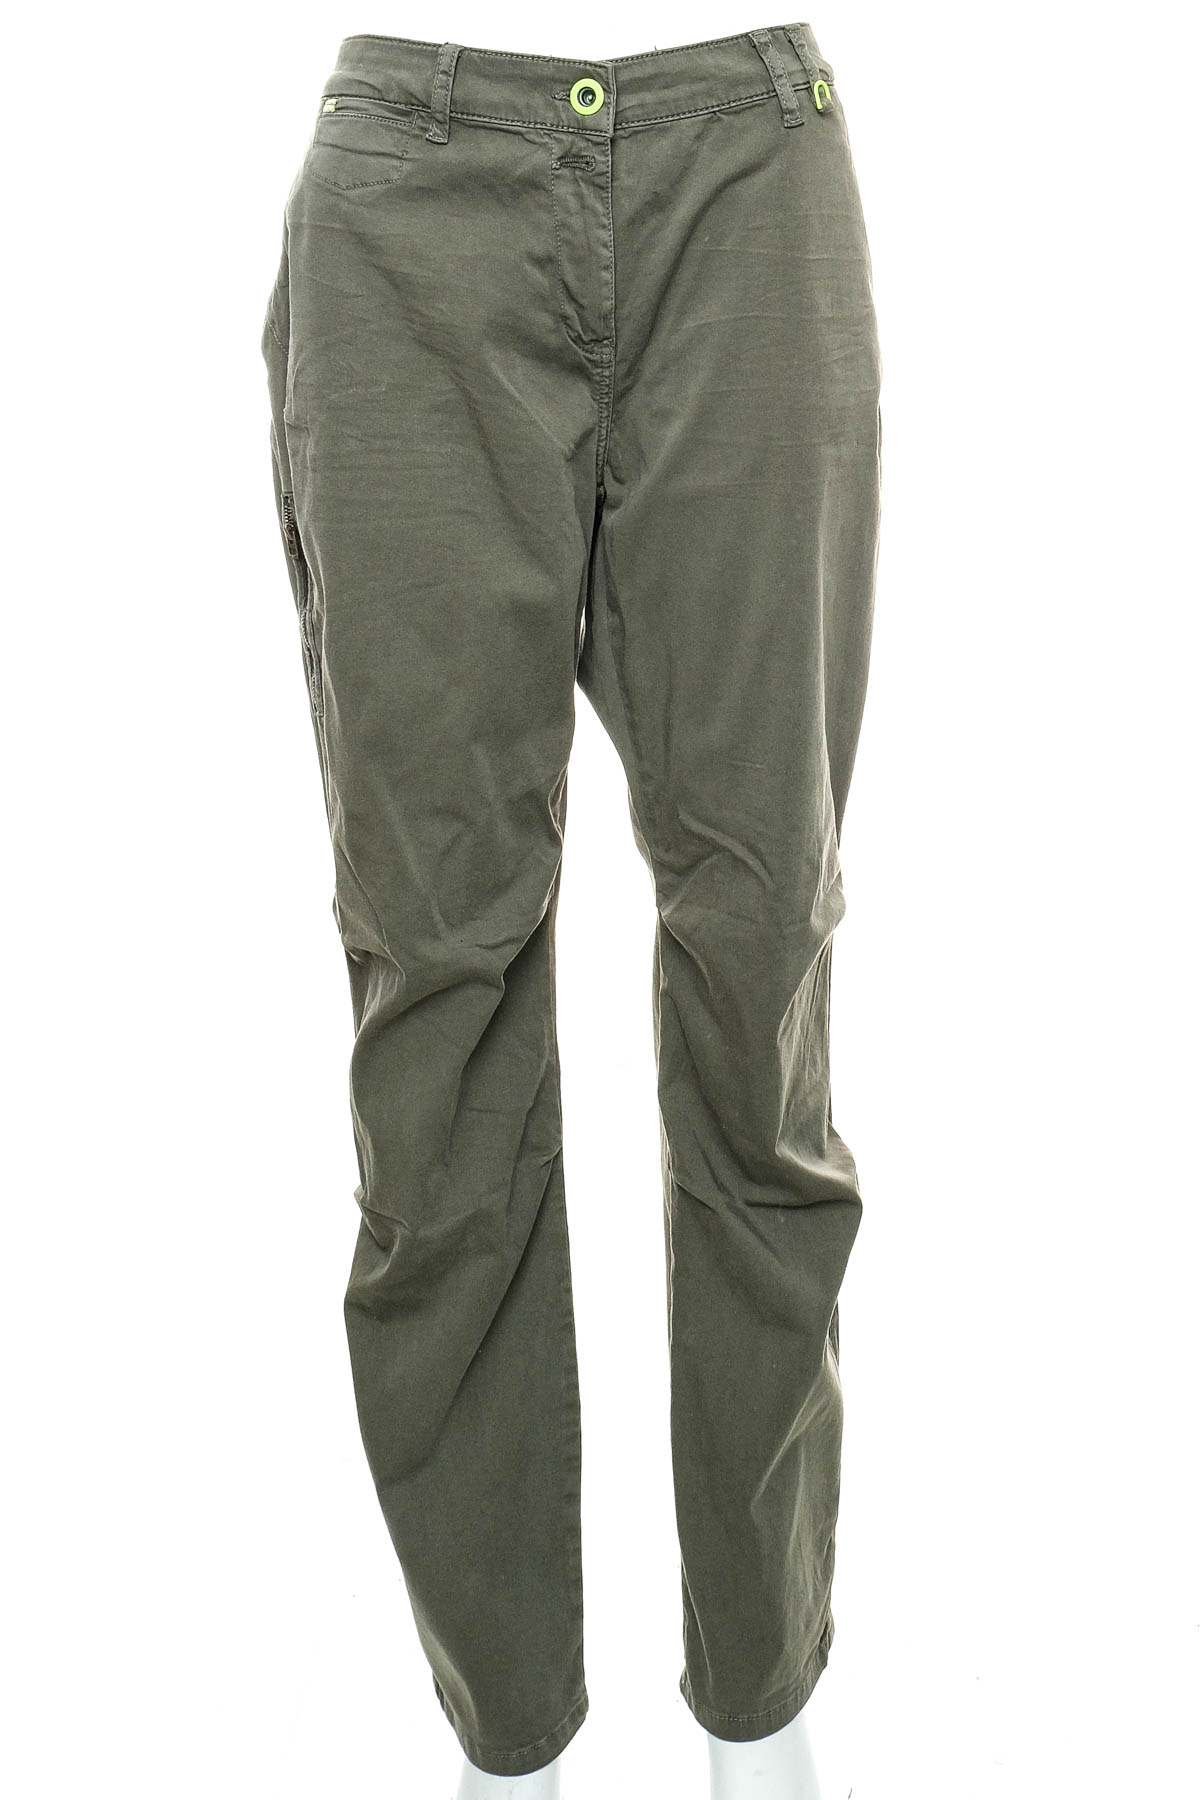 Women's trousers - CECIL - 0